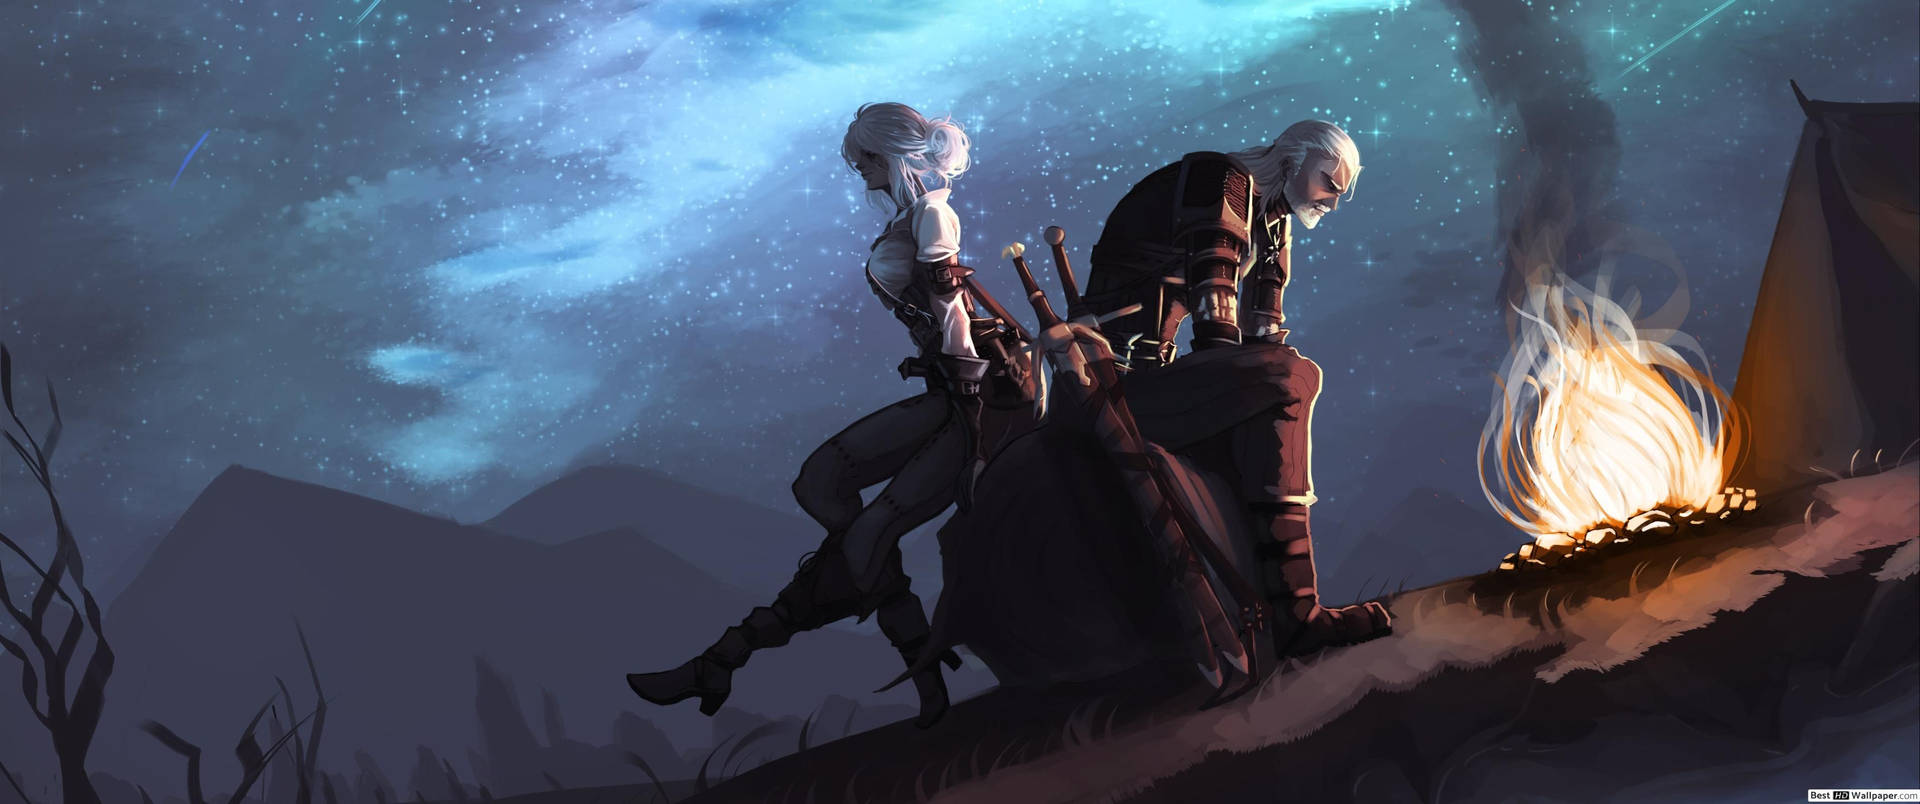 The Witcher Geralt And Ciri Fan Art Background